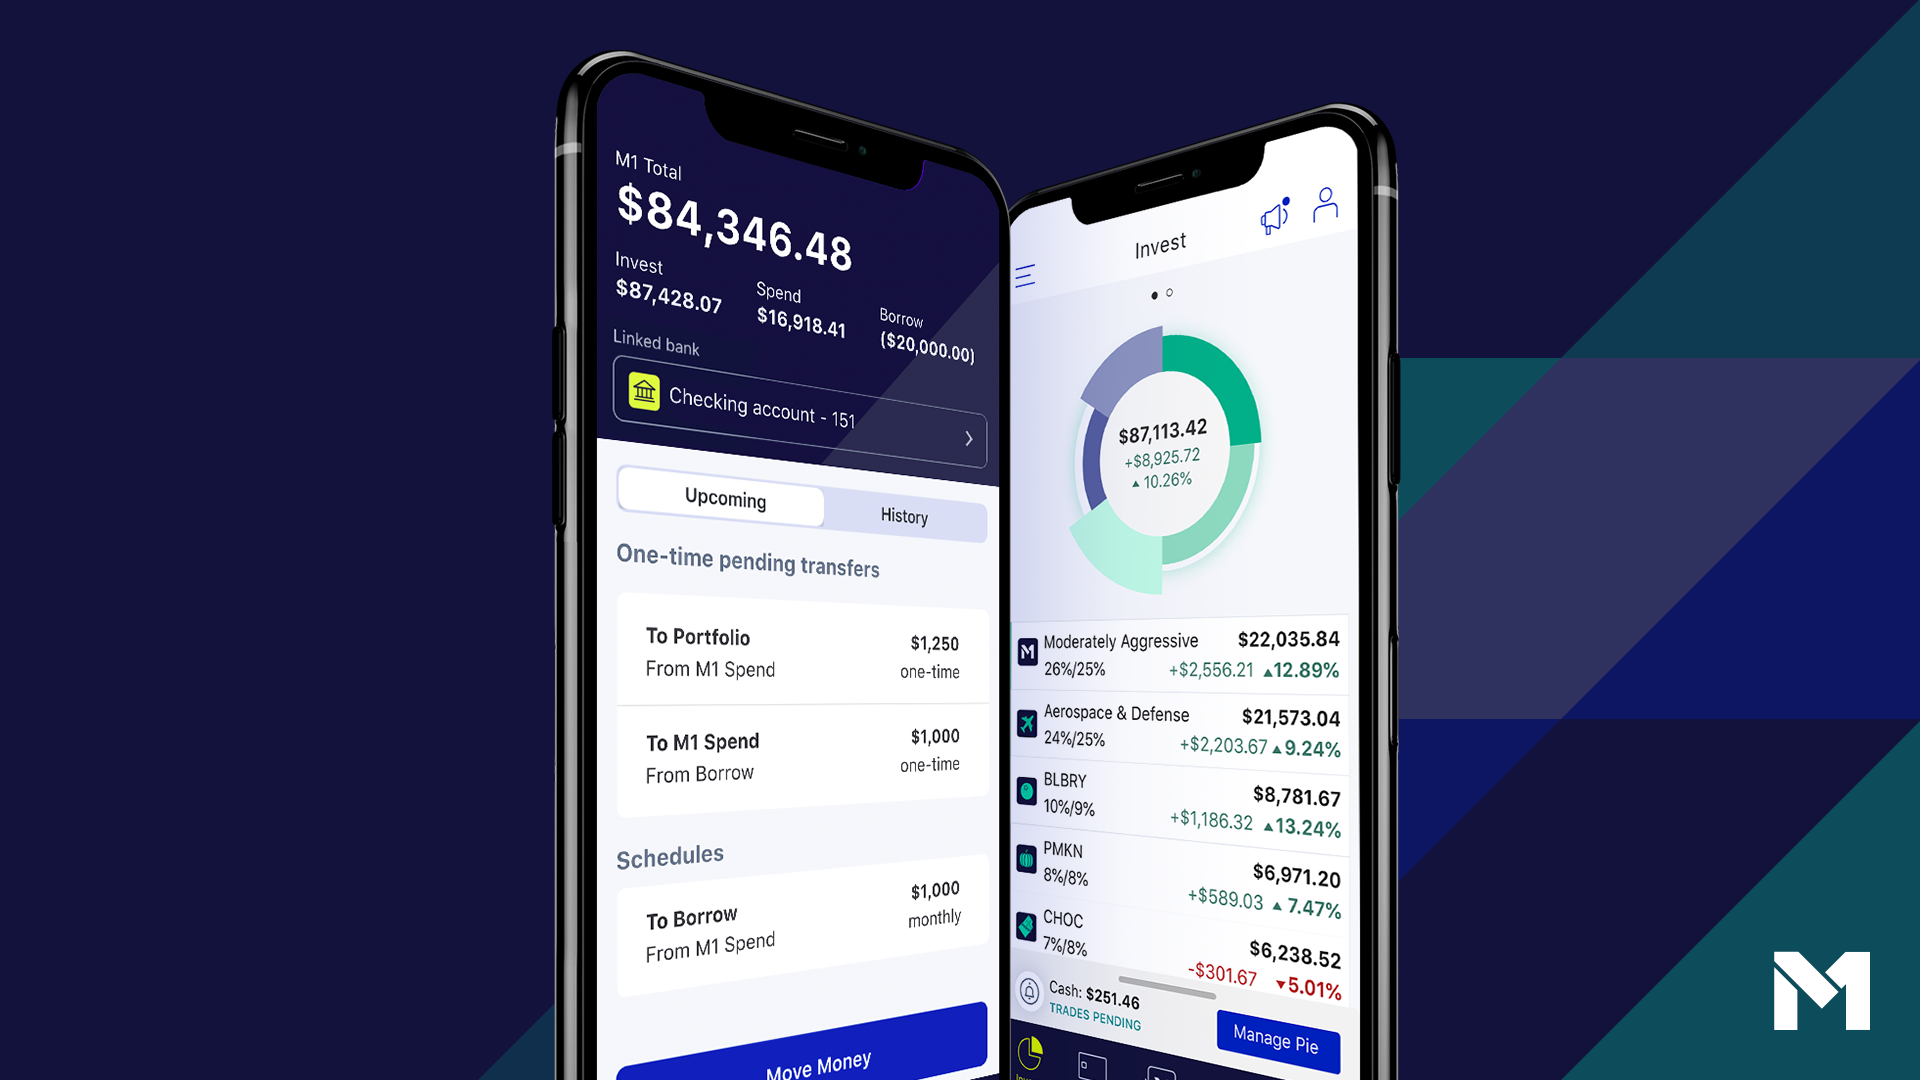 M1 Finance Adds New Features Like Mobile Wallets And Dividend Monitoring! - 1